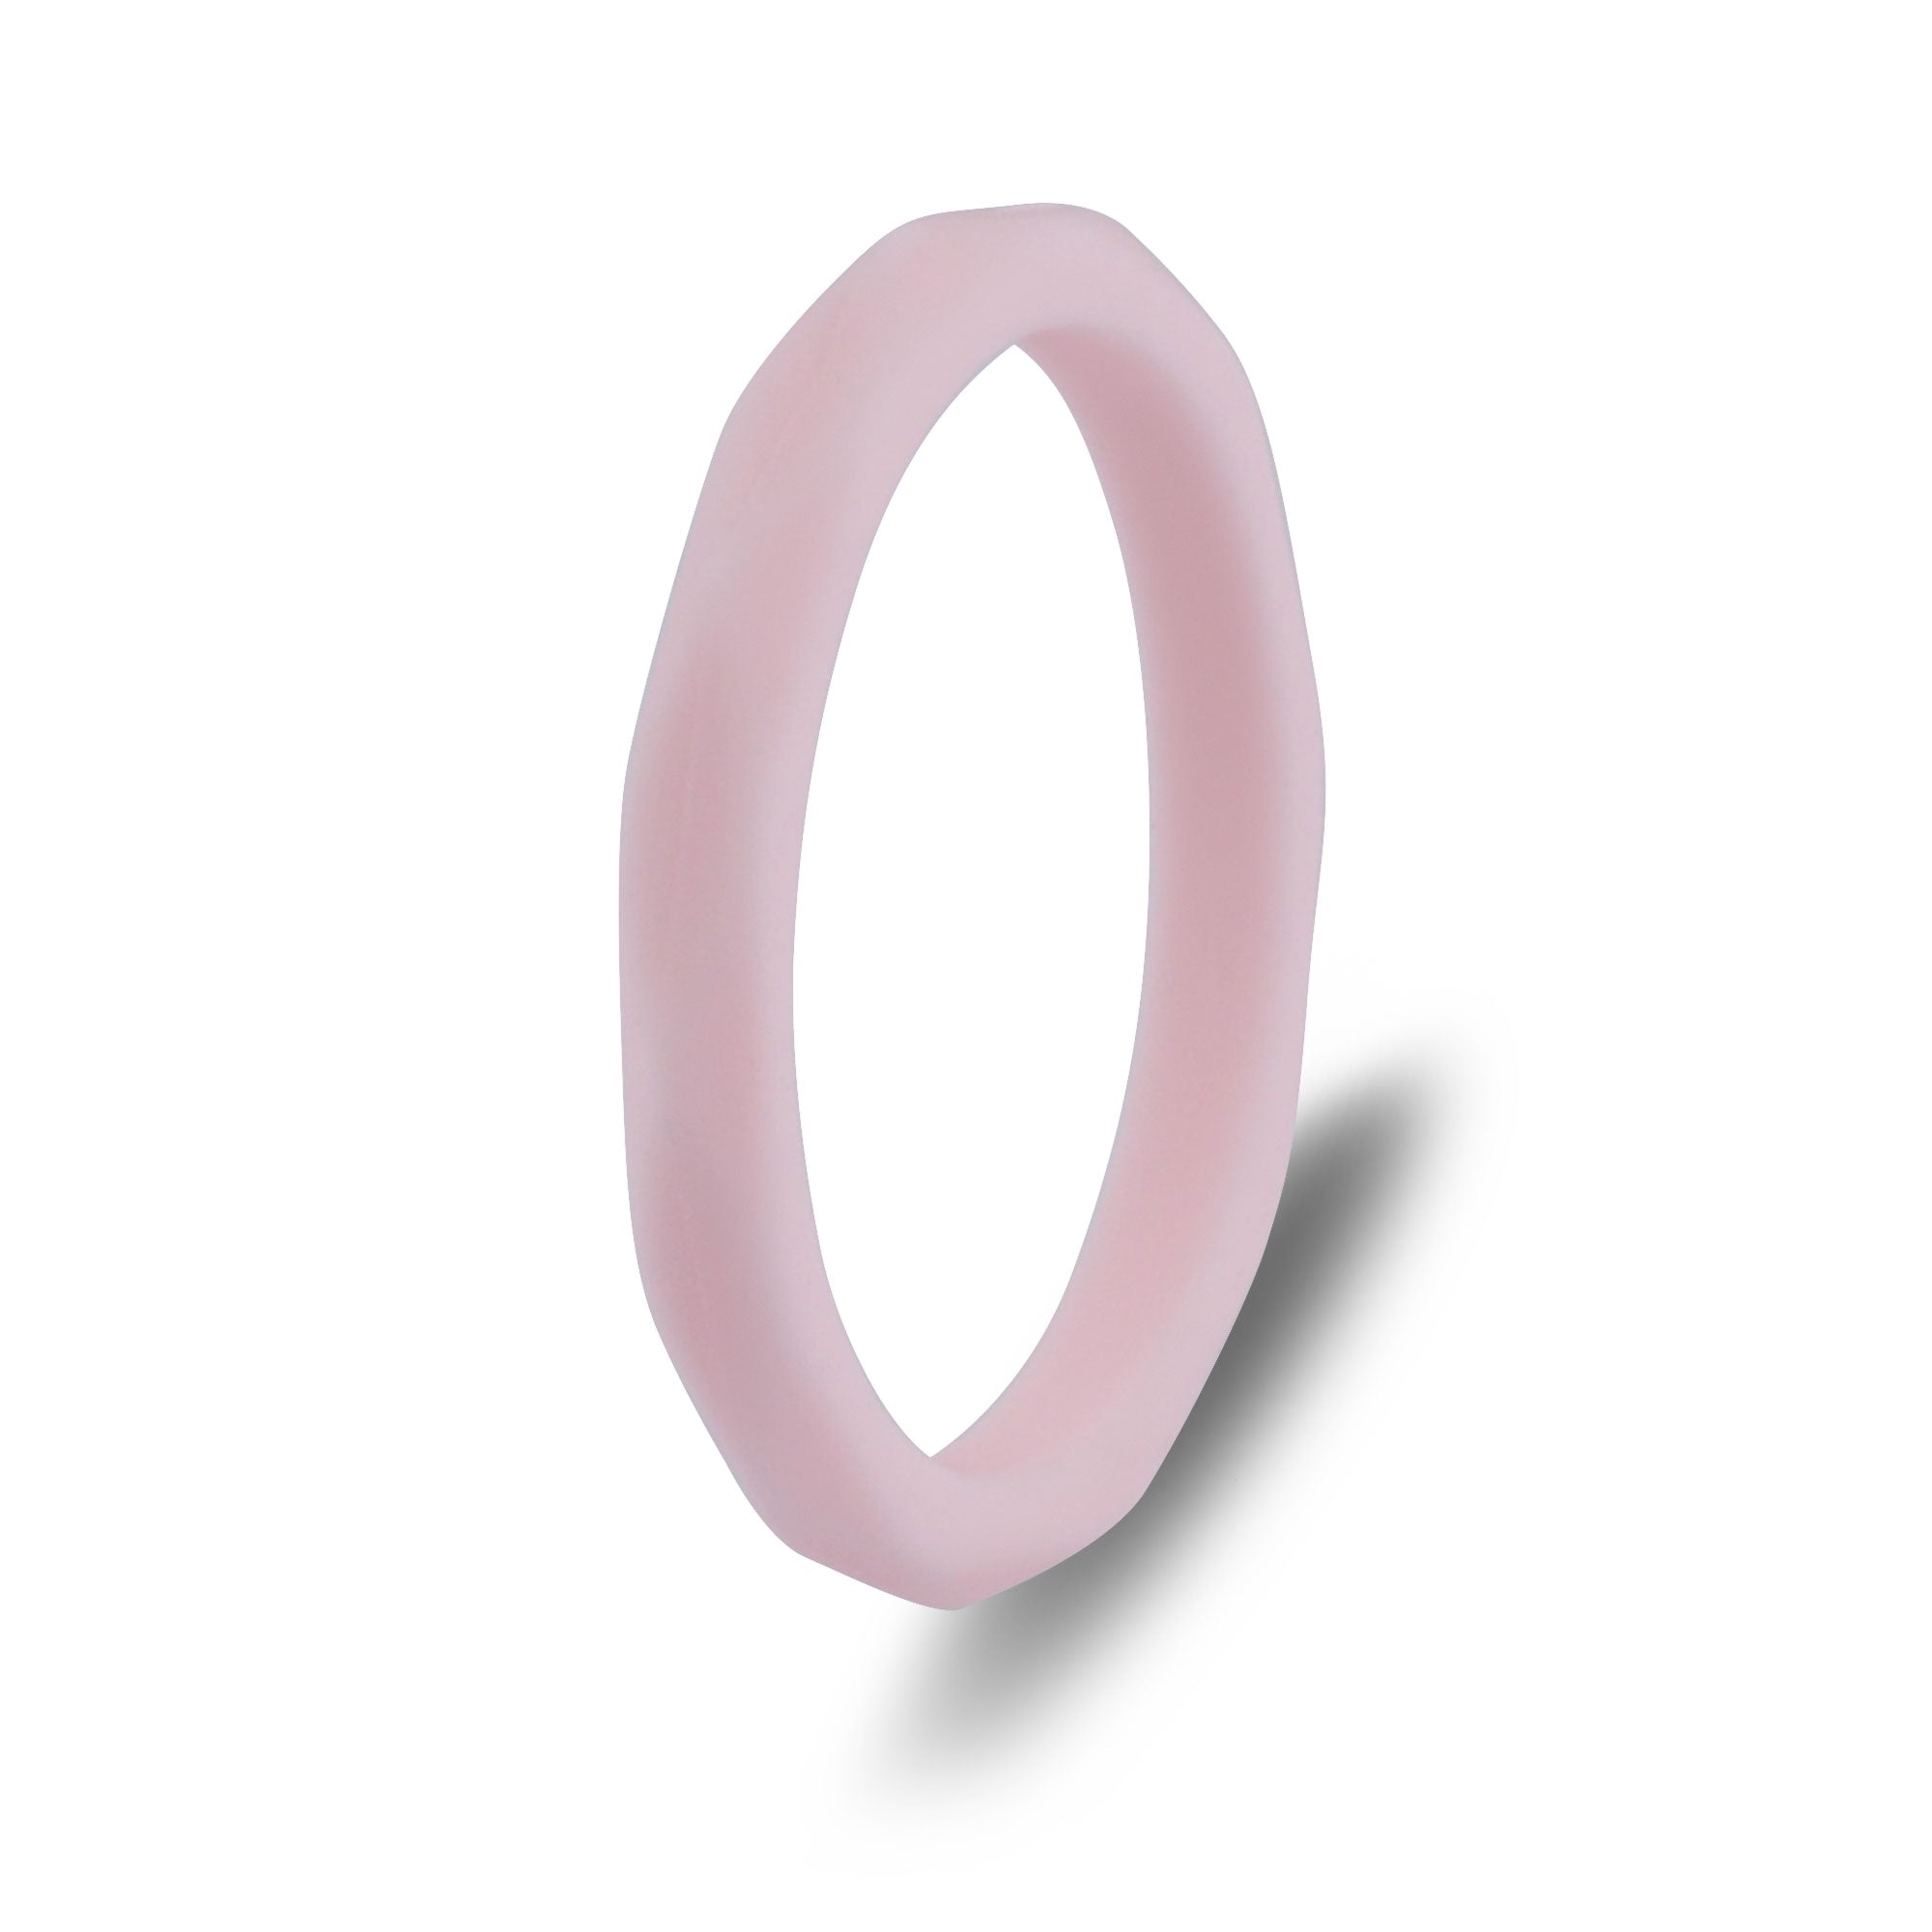 The Soft Serenade - Silicone Ring